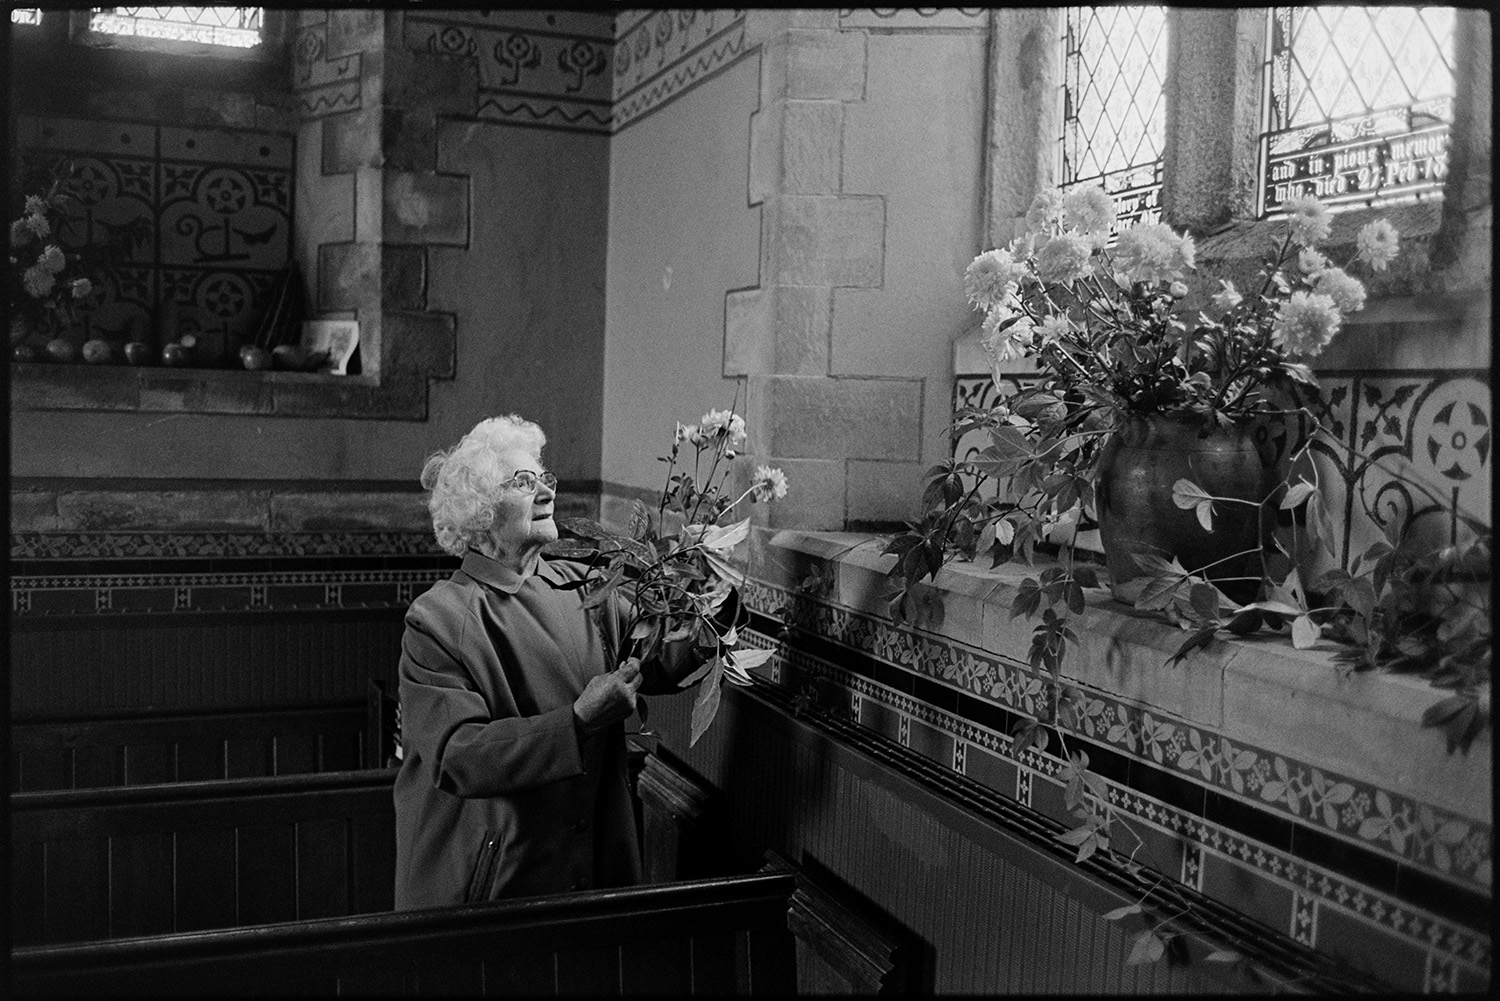 Women putting flowers in church for harvest festival. <br />
[A woman holding flowers and reaching up to put them in an arrangement in a large vase on a tiled windowsill for the Harvest Festival at Winkleigh Church.]